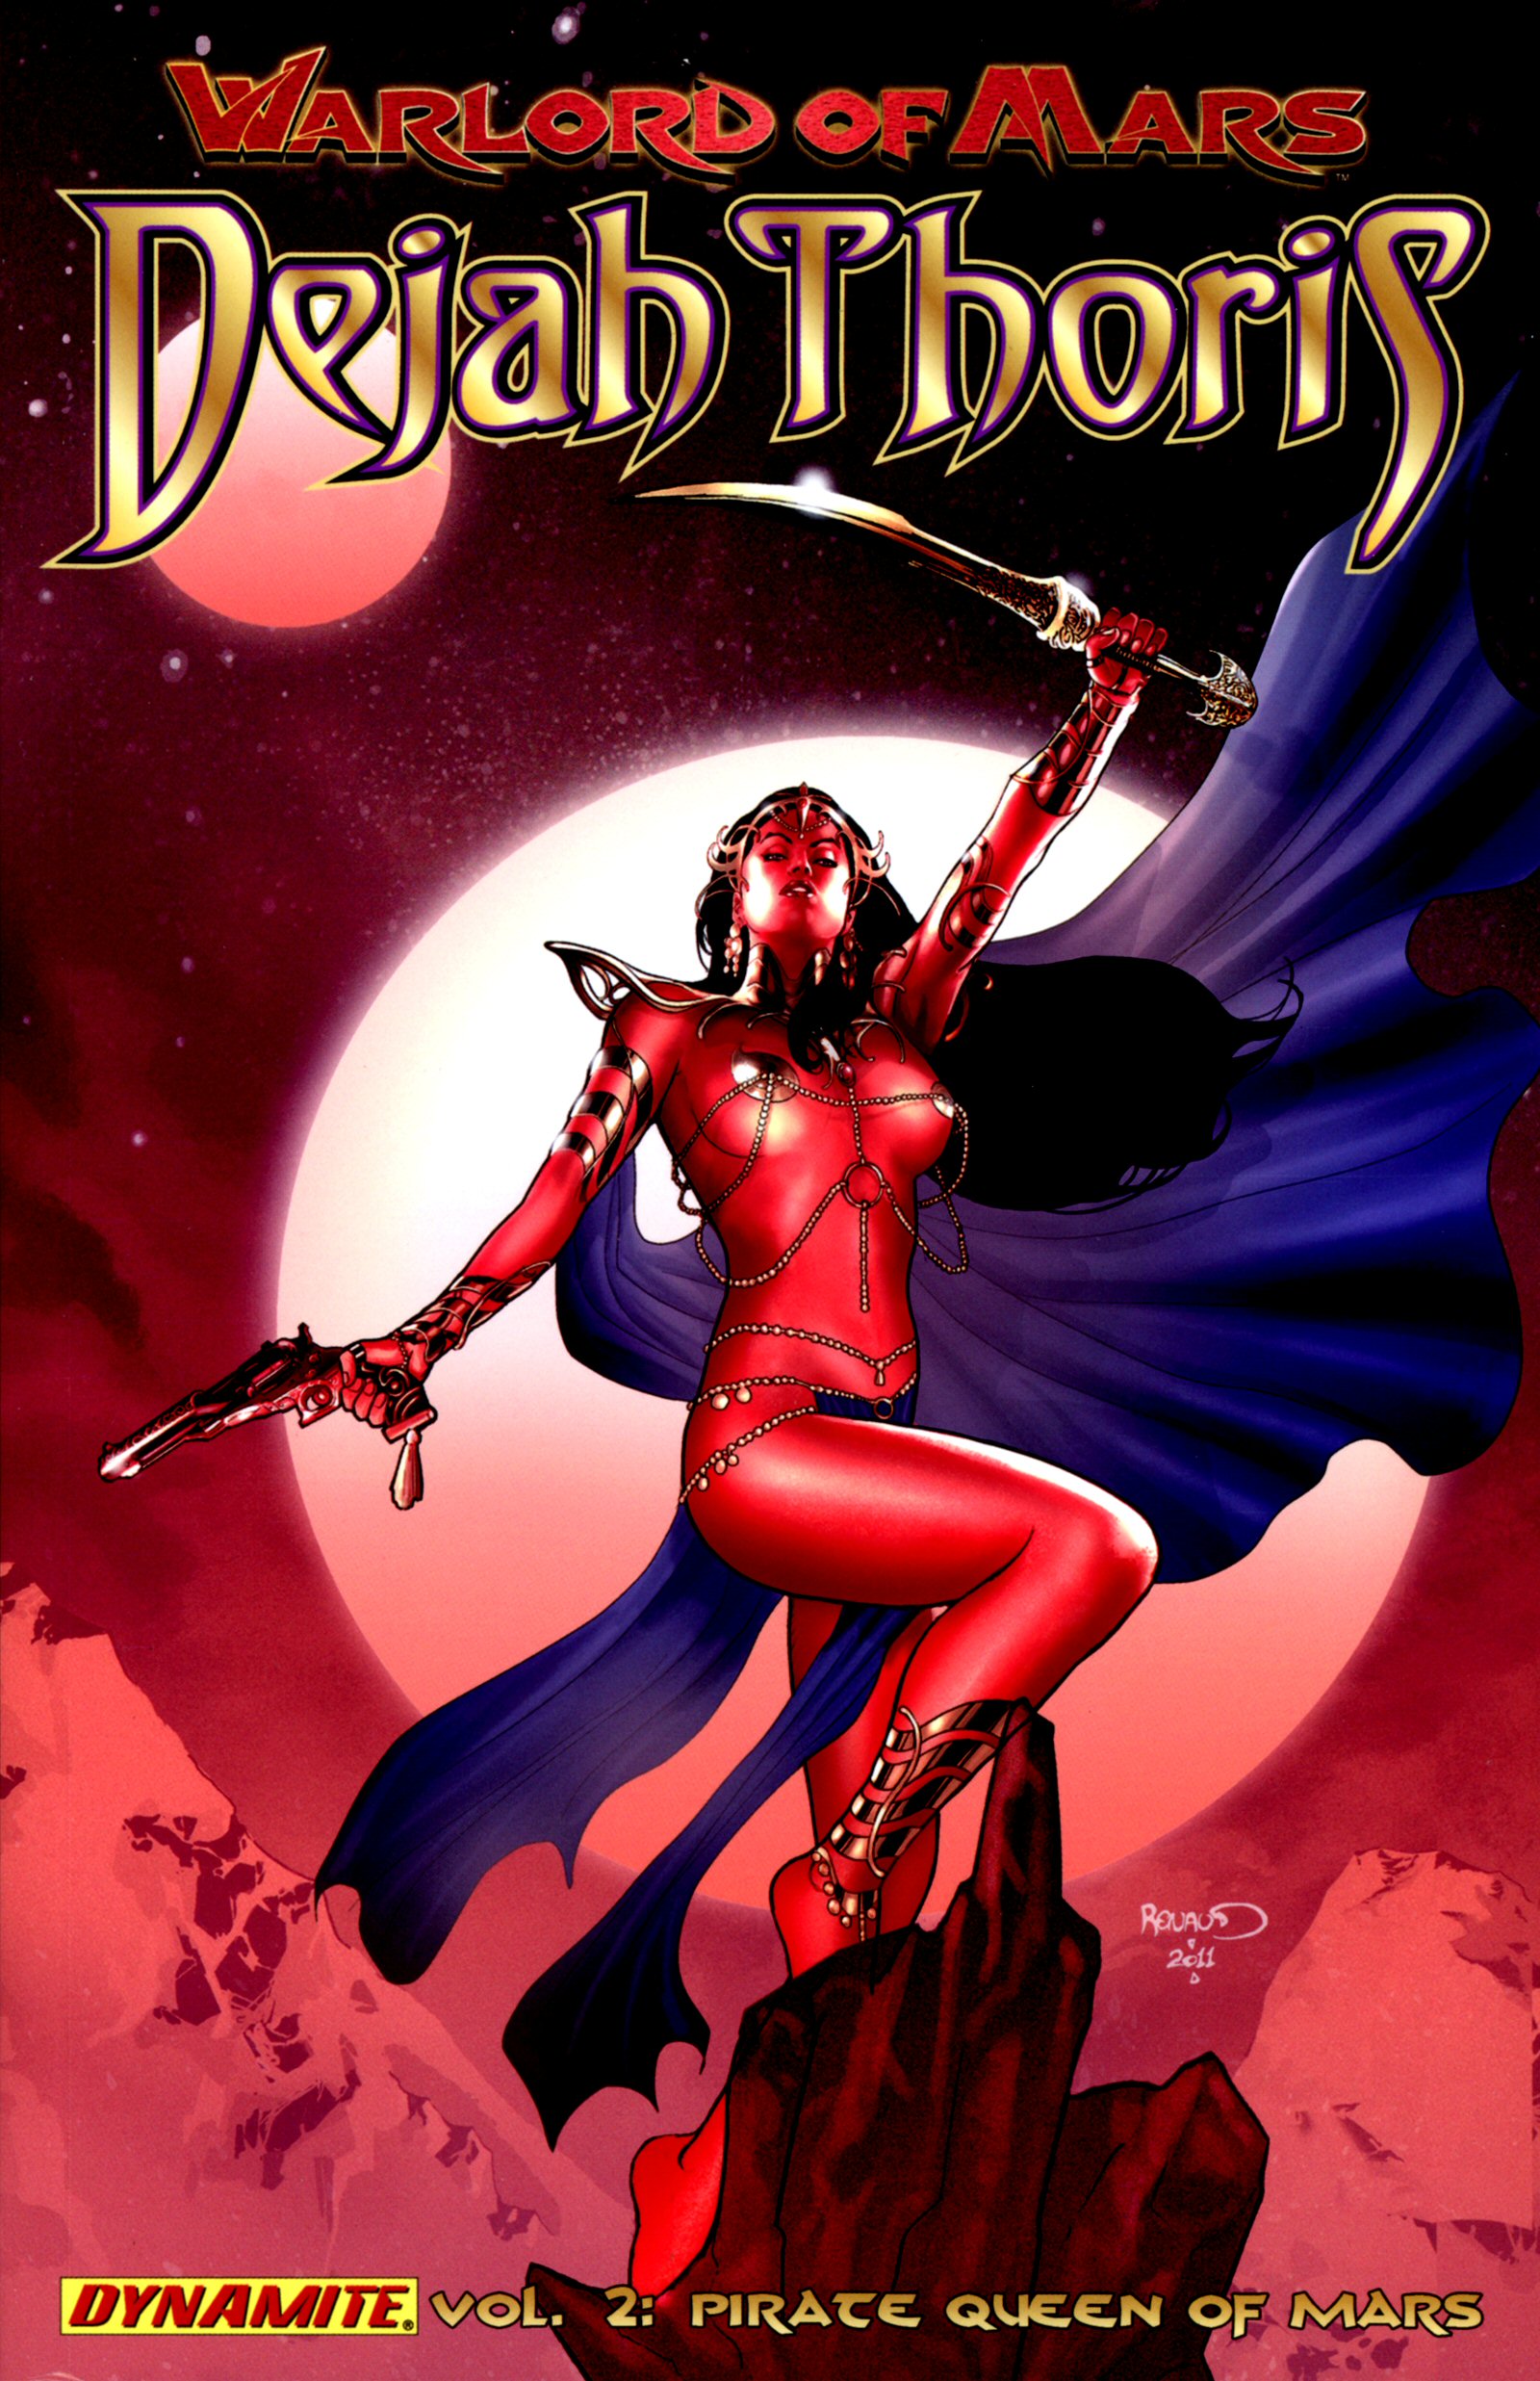 Warlord of Mars Dejah Thoris Volume 2 Pirate Queen of Mars by Renaut Porn Comic